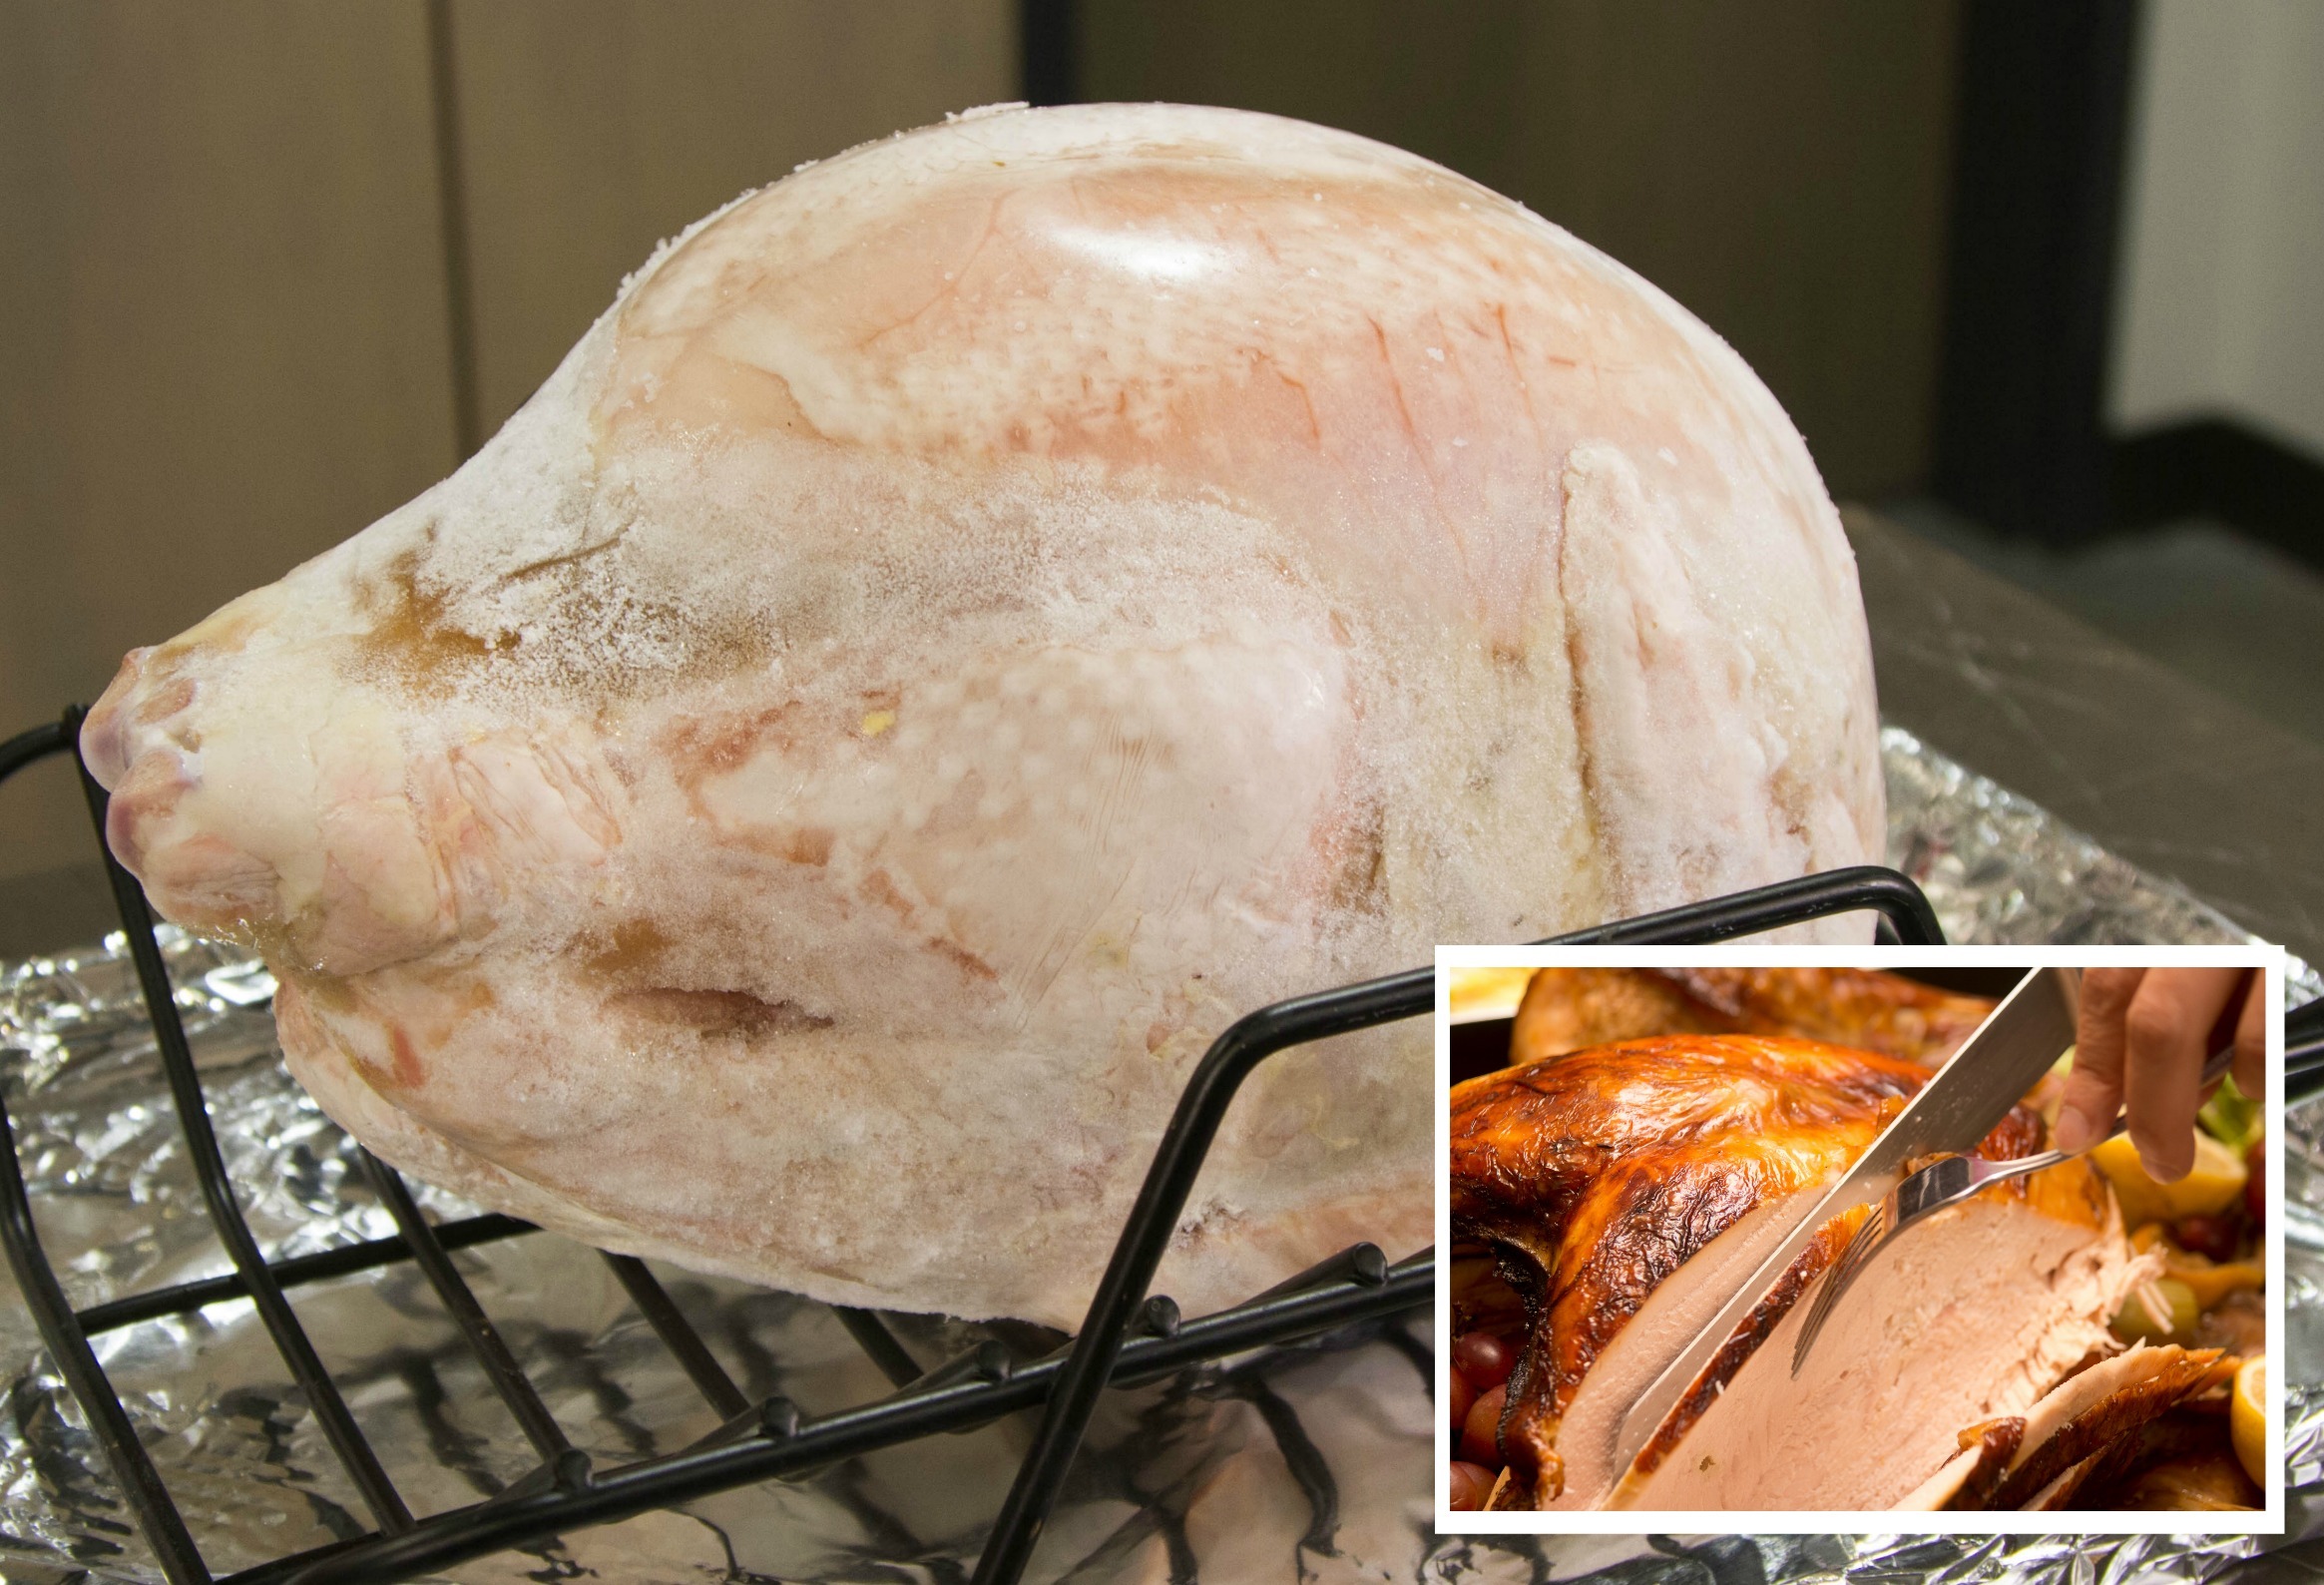 Turkey 911 How To Cook A Frozen Turkey Thermoworks,How To Make Rotel Dip